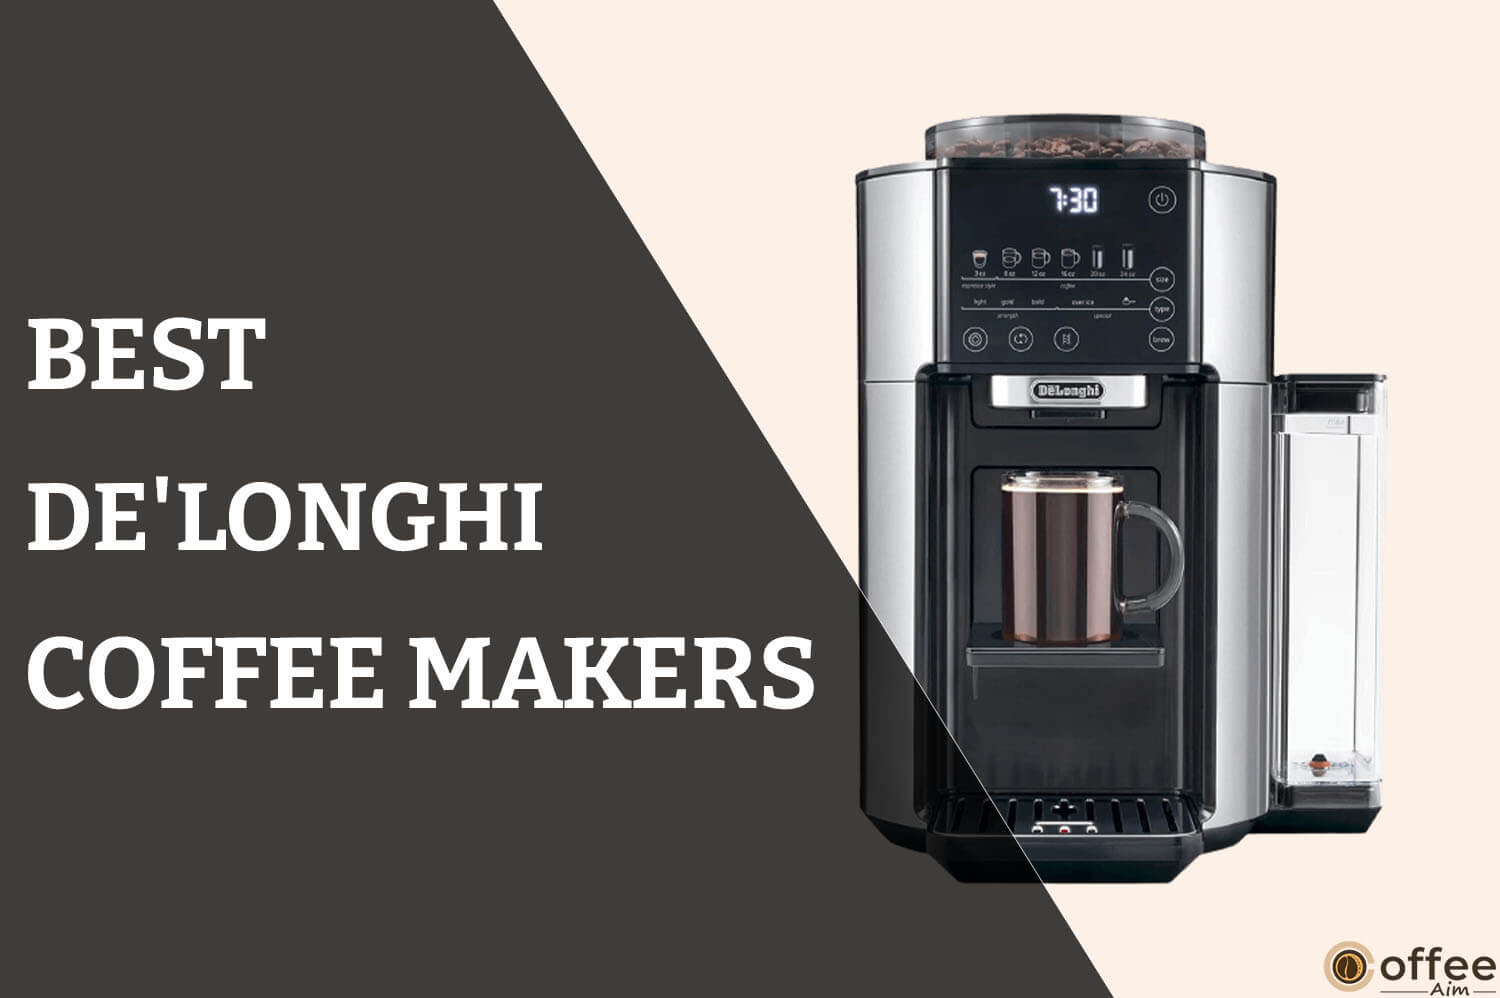 Feature image for the article "Best De'Longhi Coffee Makers"